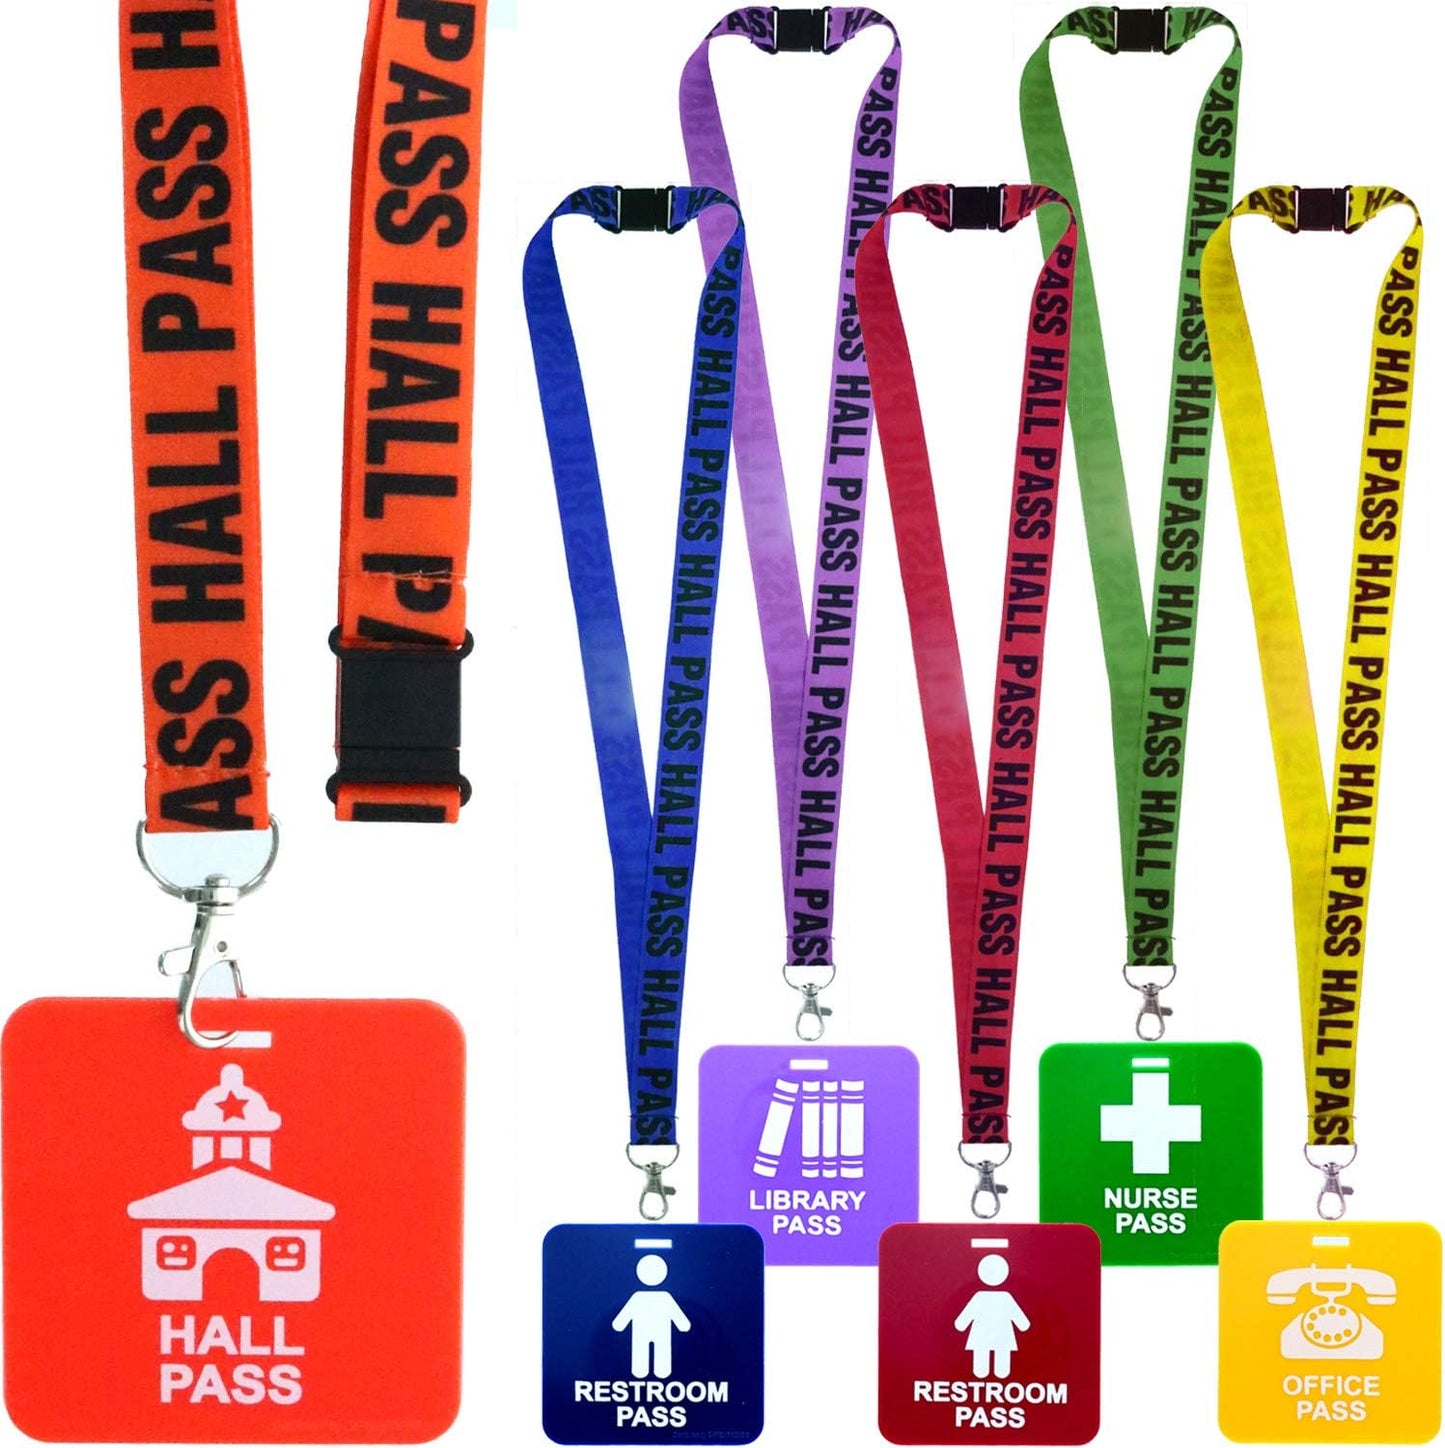 GIFTEXPRESS Hall Pass Lanyards and School Passes, 6" x 7" x 1"